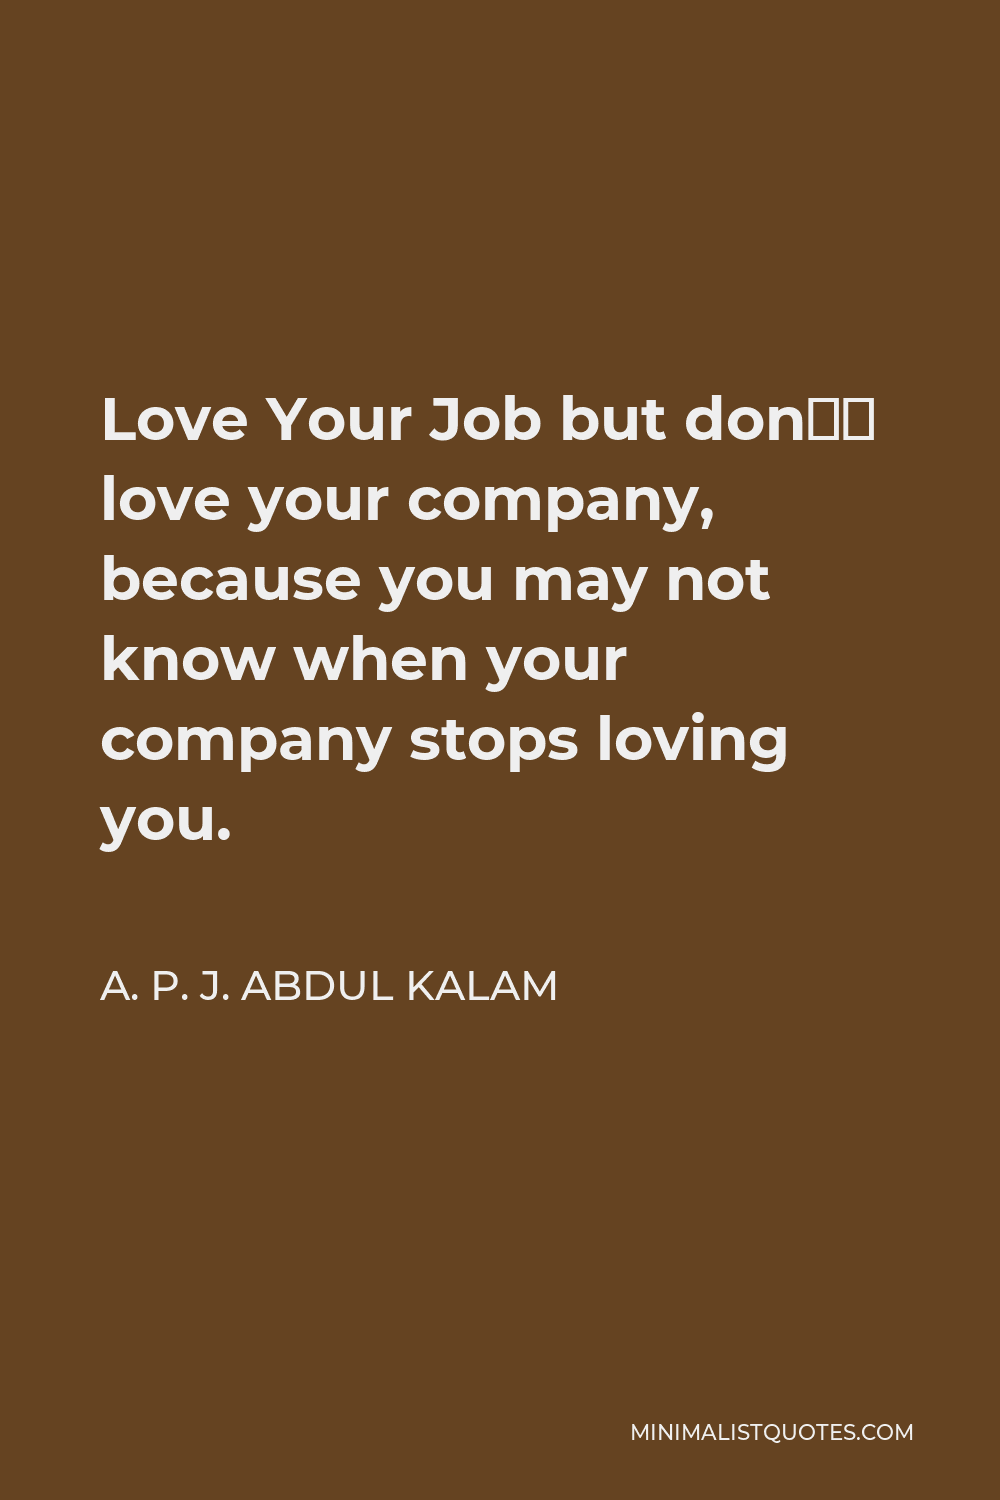 A. P. J. Abdul Kalam Quote - Love Your Job but don’t love your company, because you may not know when your company stops loving you.